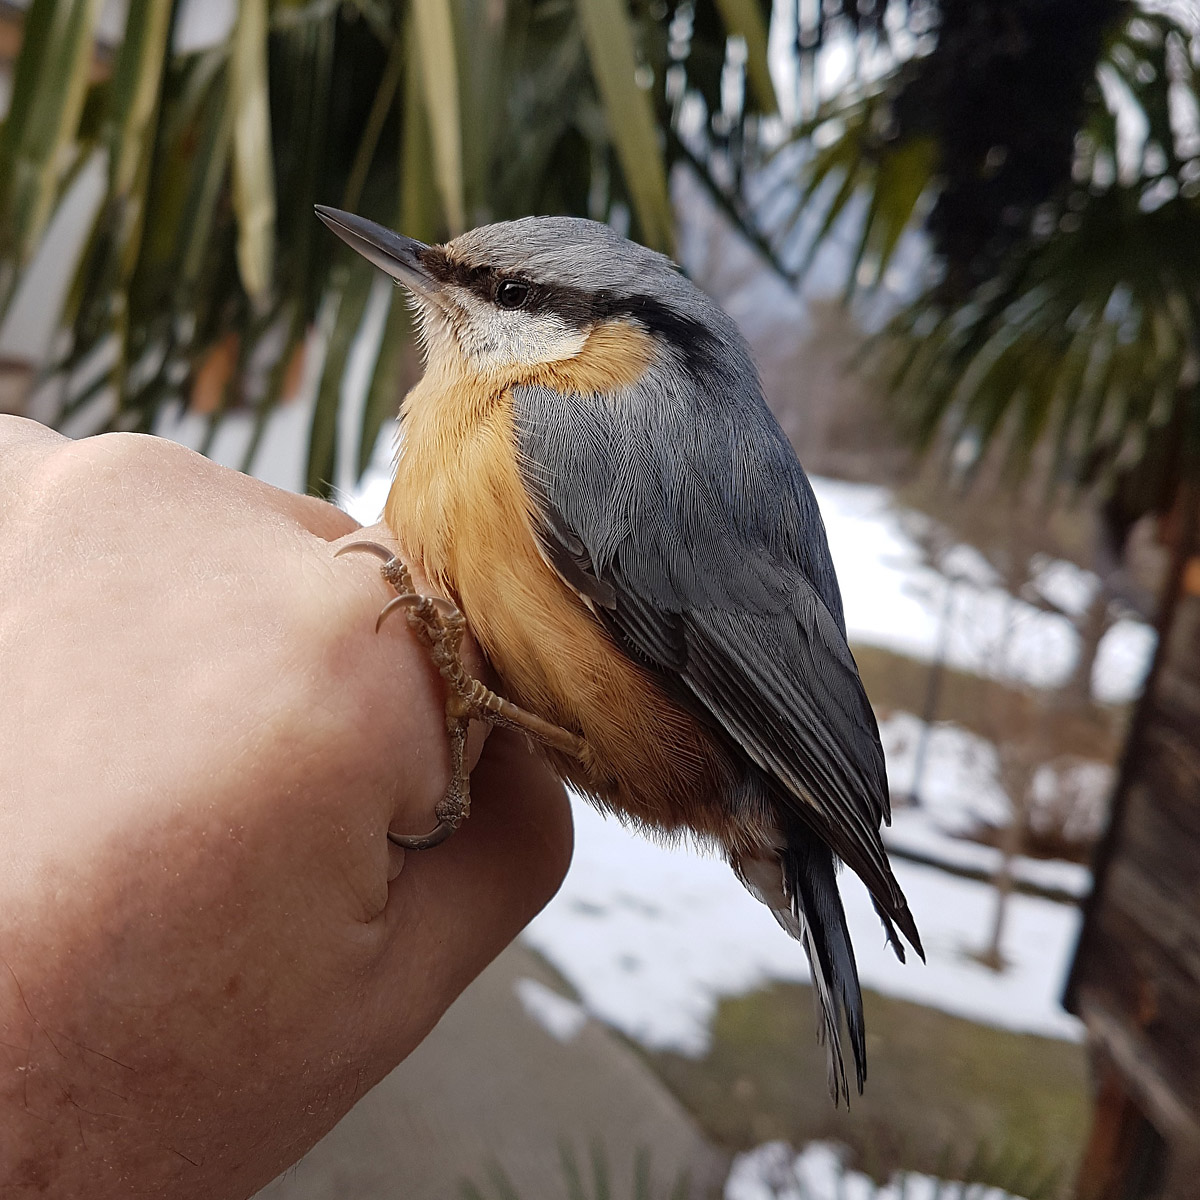 Nuthatch on my hand in the garden...